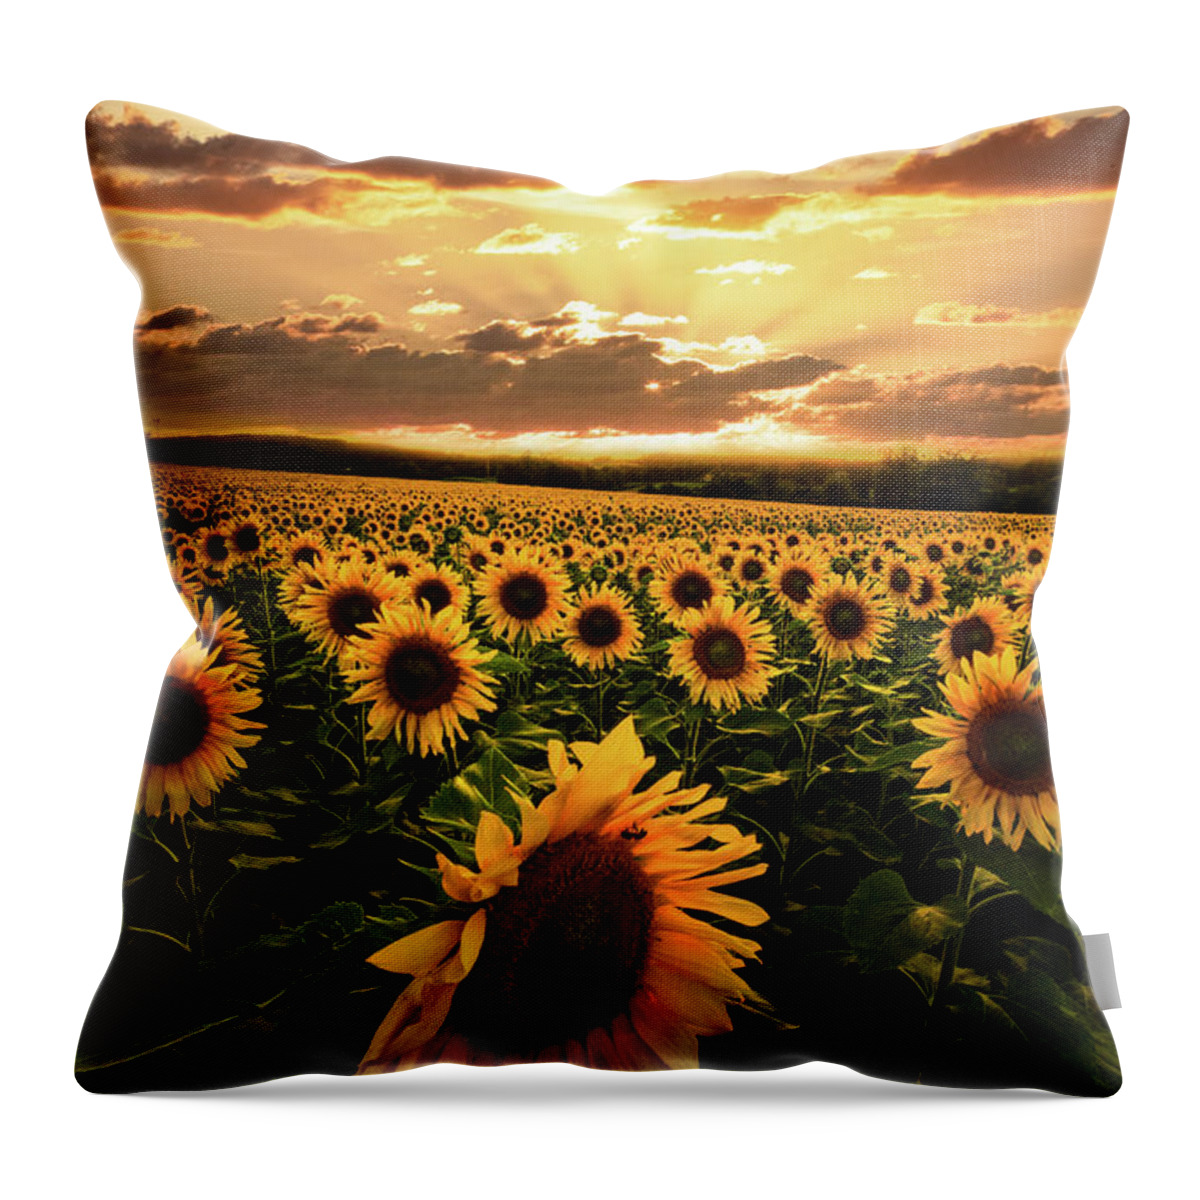 Barns Throw Pillow featuring the photograph Evening Sunset Sunflowers by Debra and Dave Vanderlaan